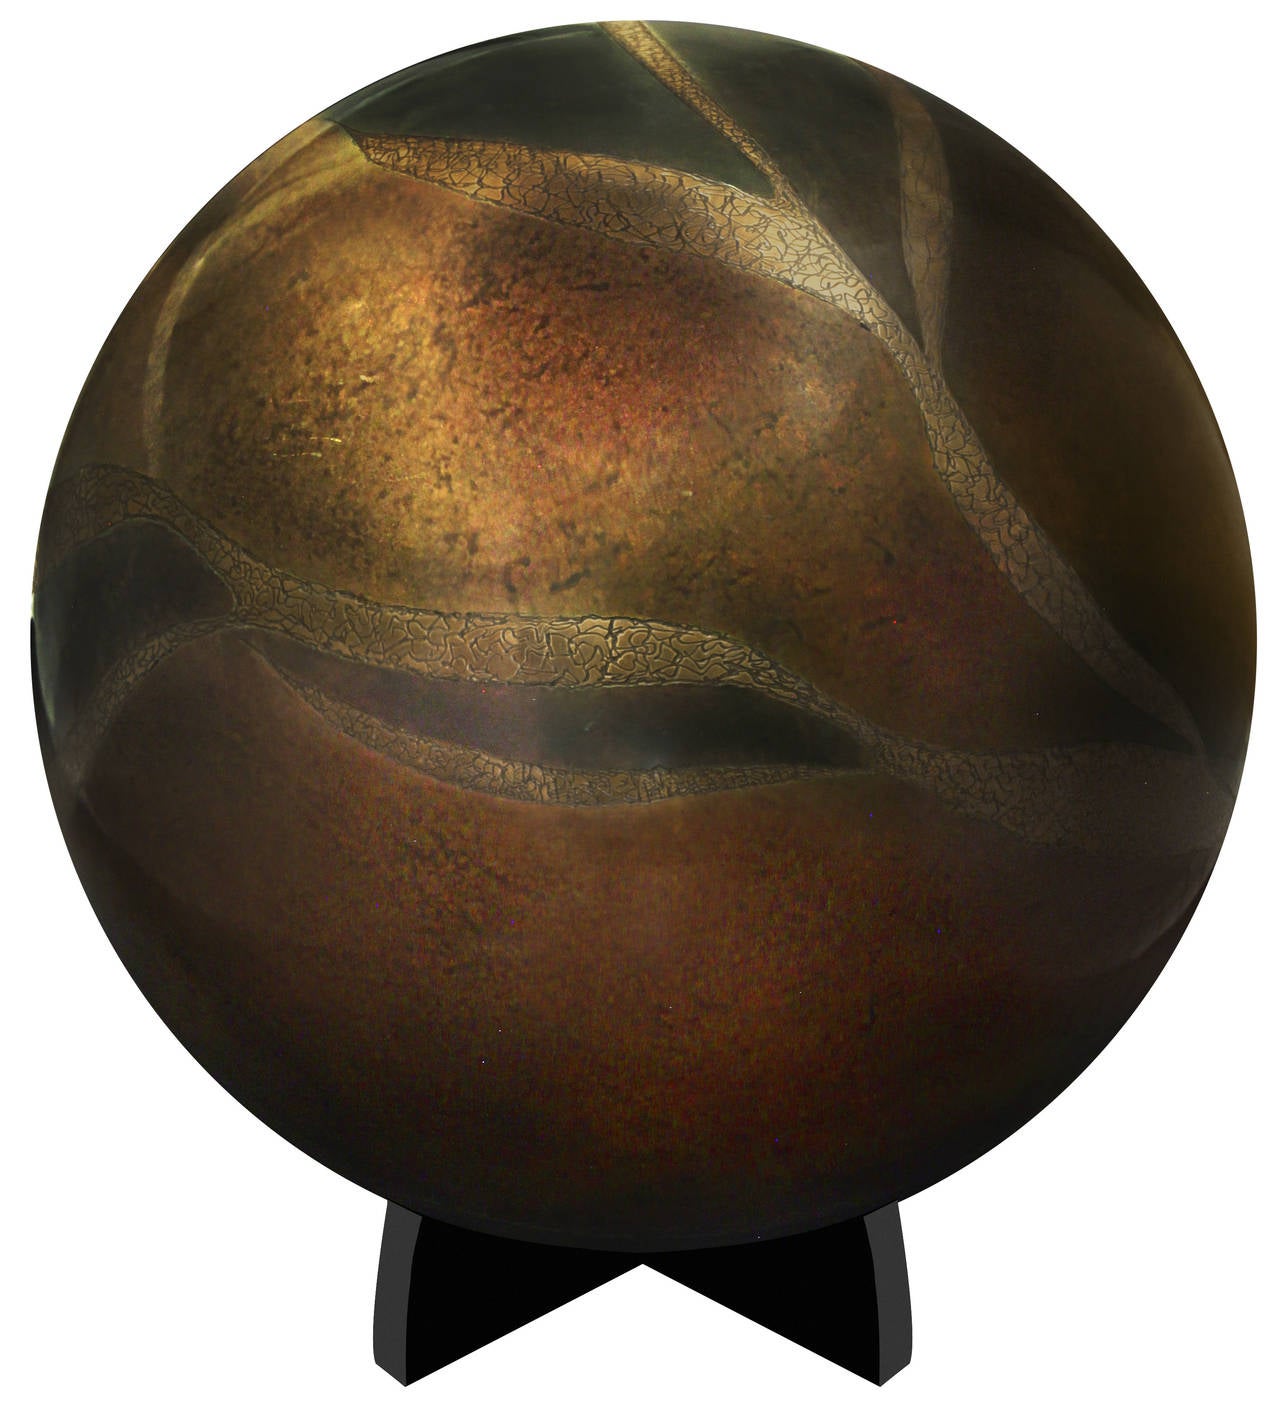 Mid-Century Modern Large Bronze Orb Sculpture with Incised Textural Decoration by Karl Springer